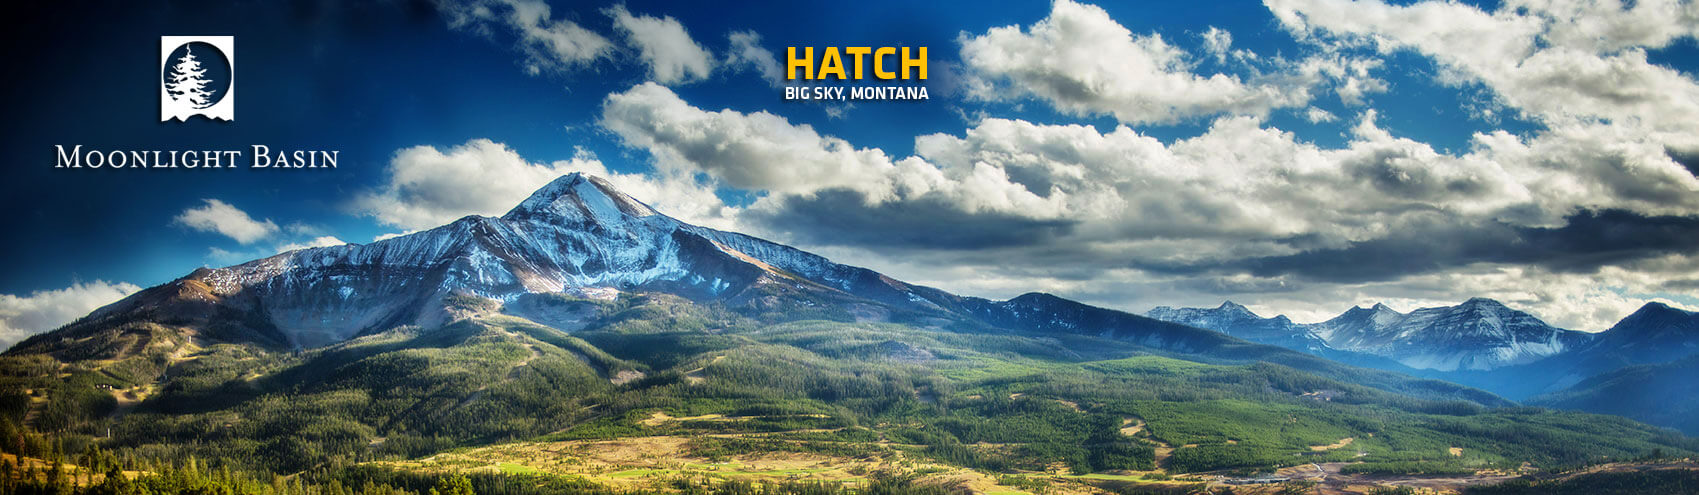 HATCH Experience North America at Moonlight Basin in Big Sky, Montana